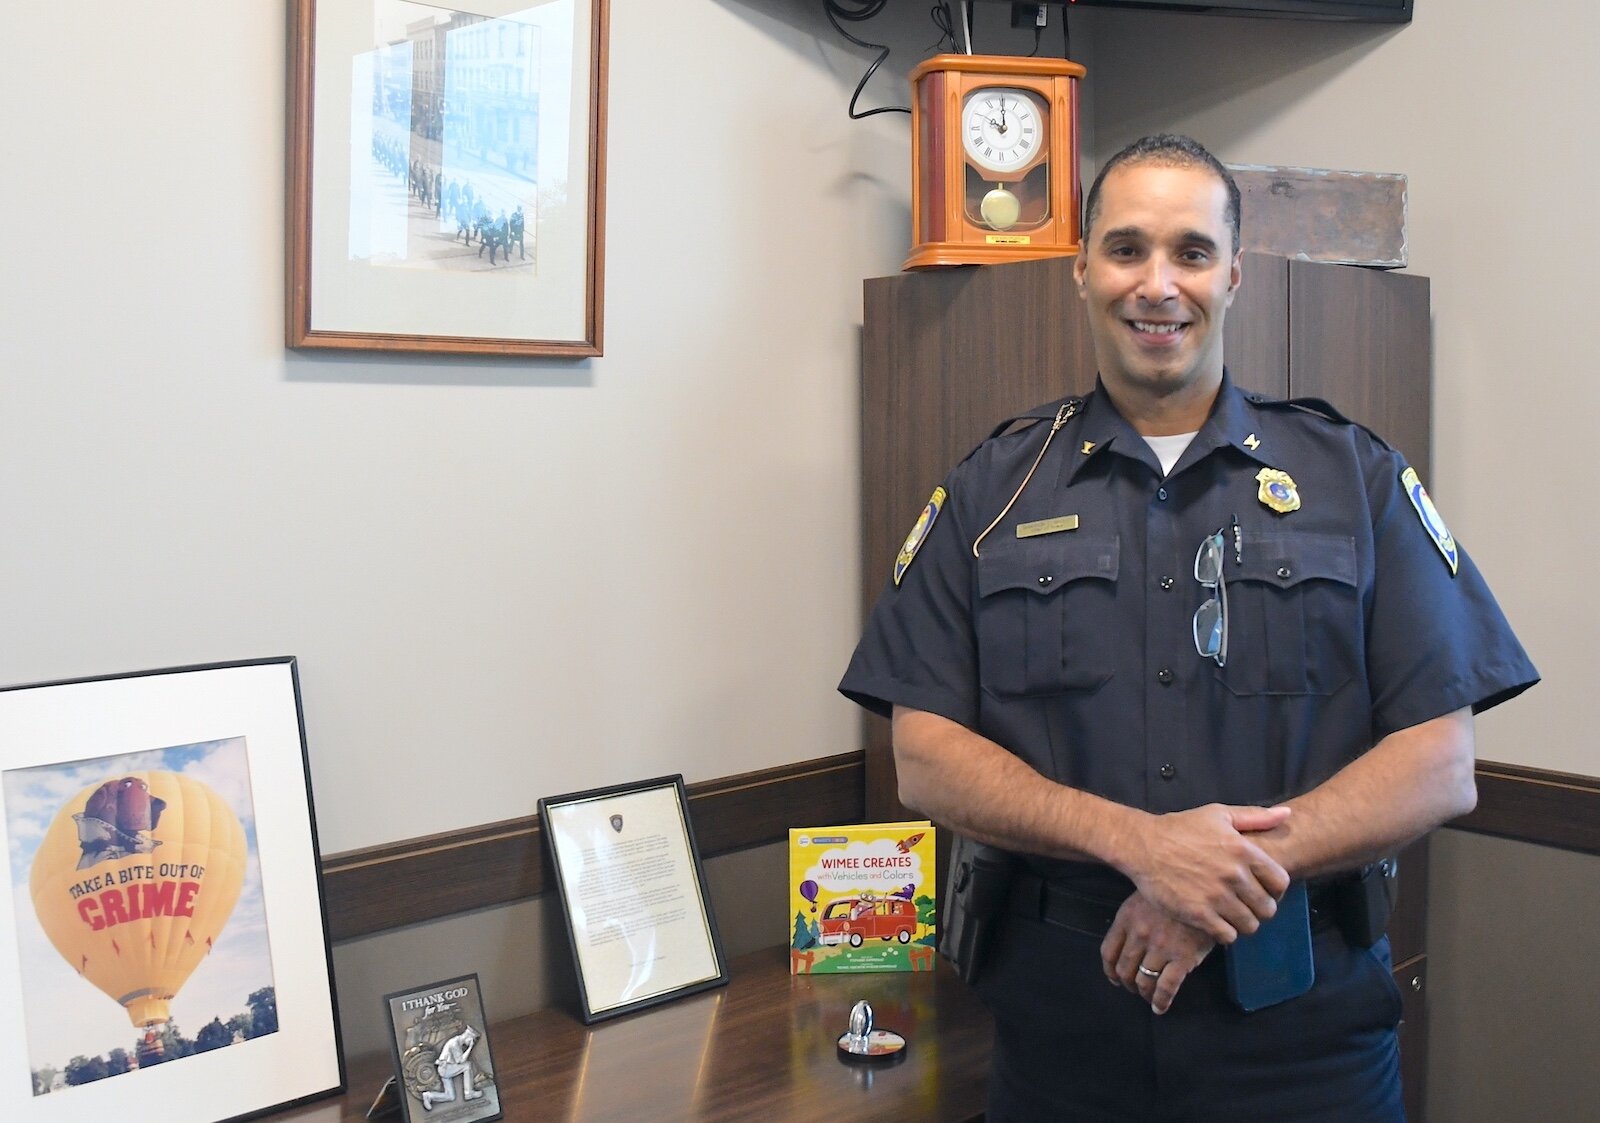 Battle Creek’s new Police Chief is Shannon Bagley.